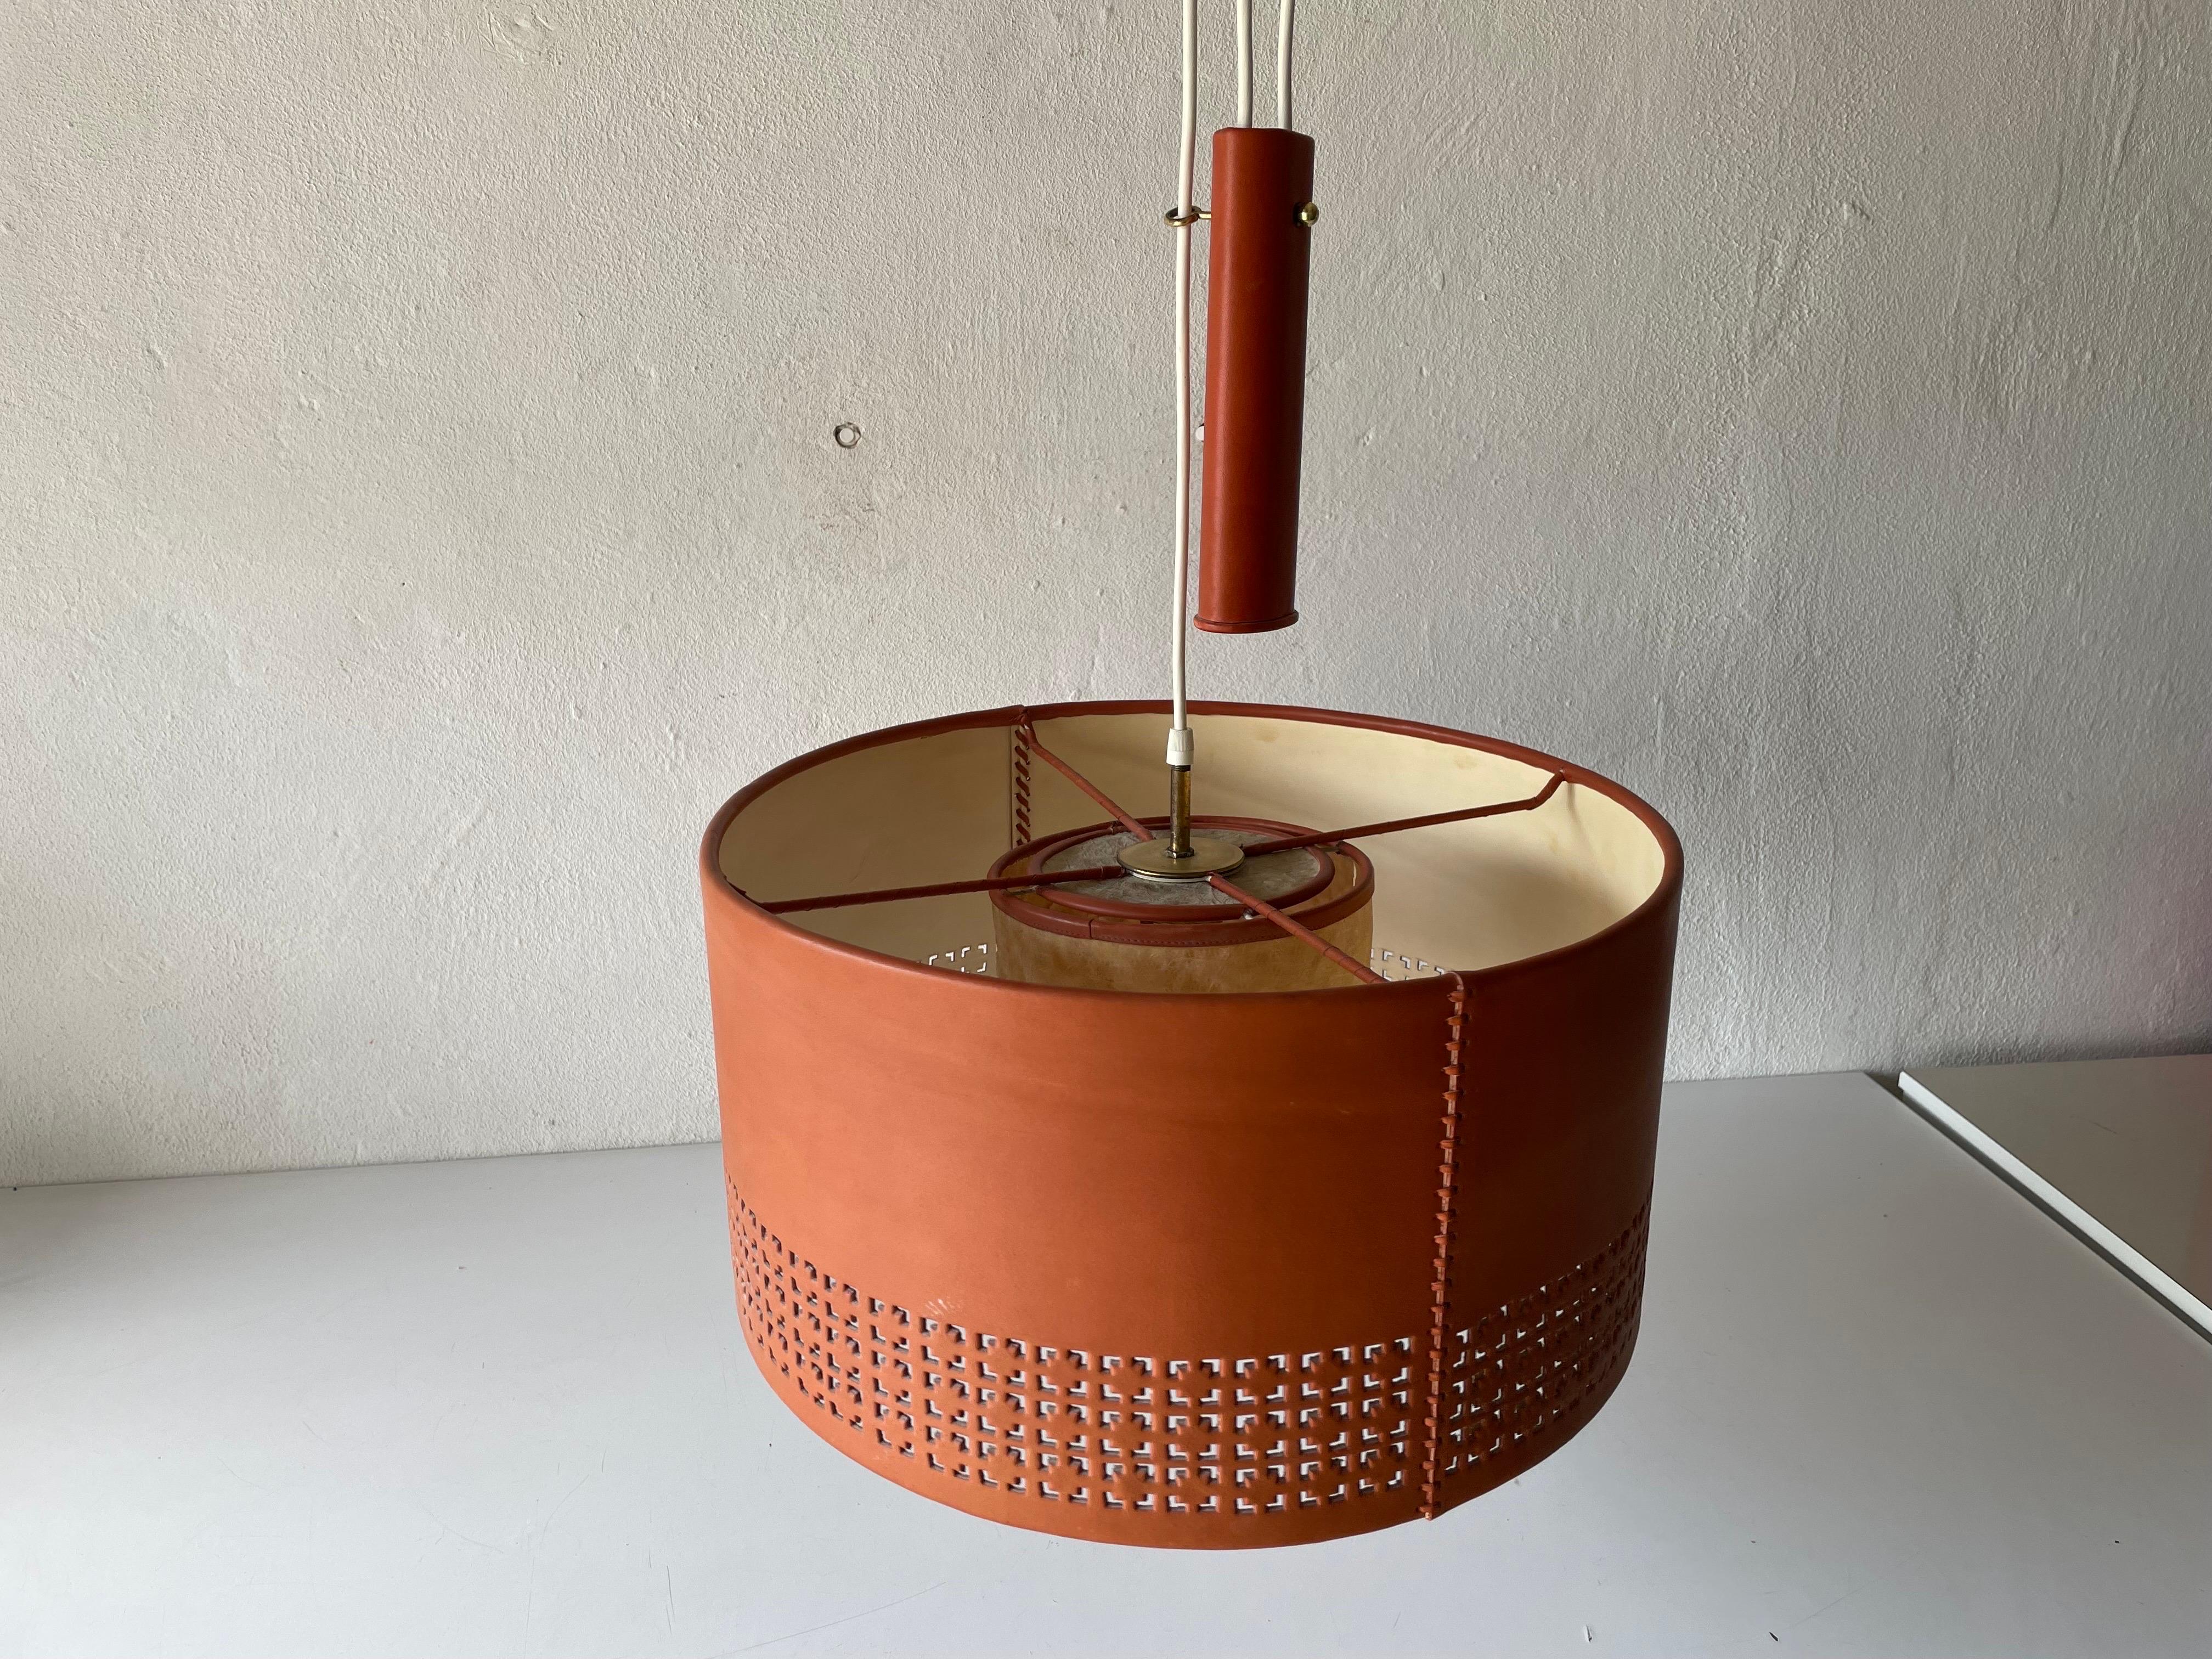 Cylindrical leather shade with Motifs Counterweight pendant lamp, 1960s, Germany

Minimalist and rare design. 

Lampshade is in good condition and clean. 
This lamp works with E27 light bulb. 
Max 100W Wired and suitable to use with 220V and